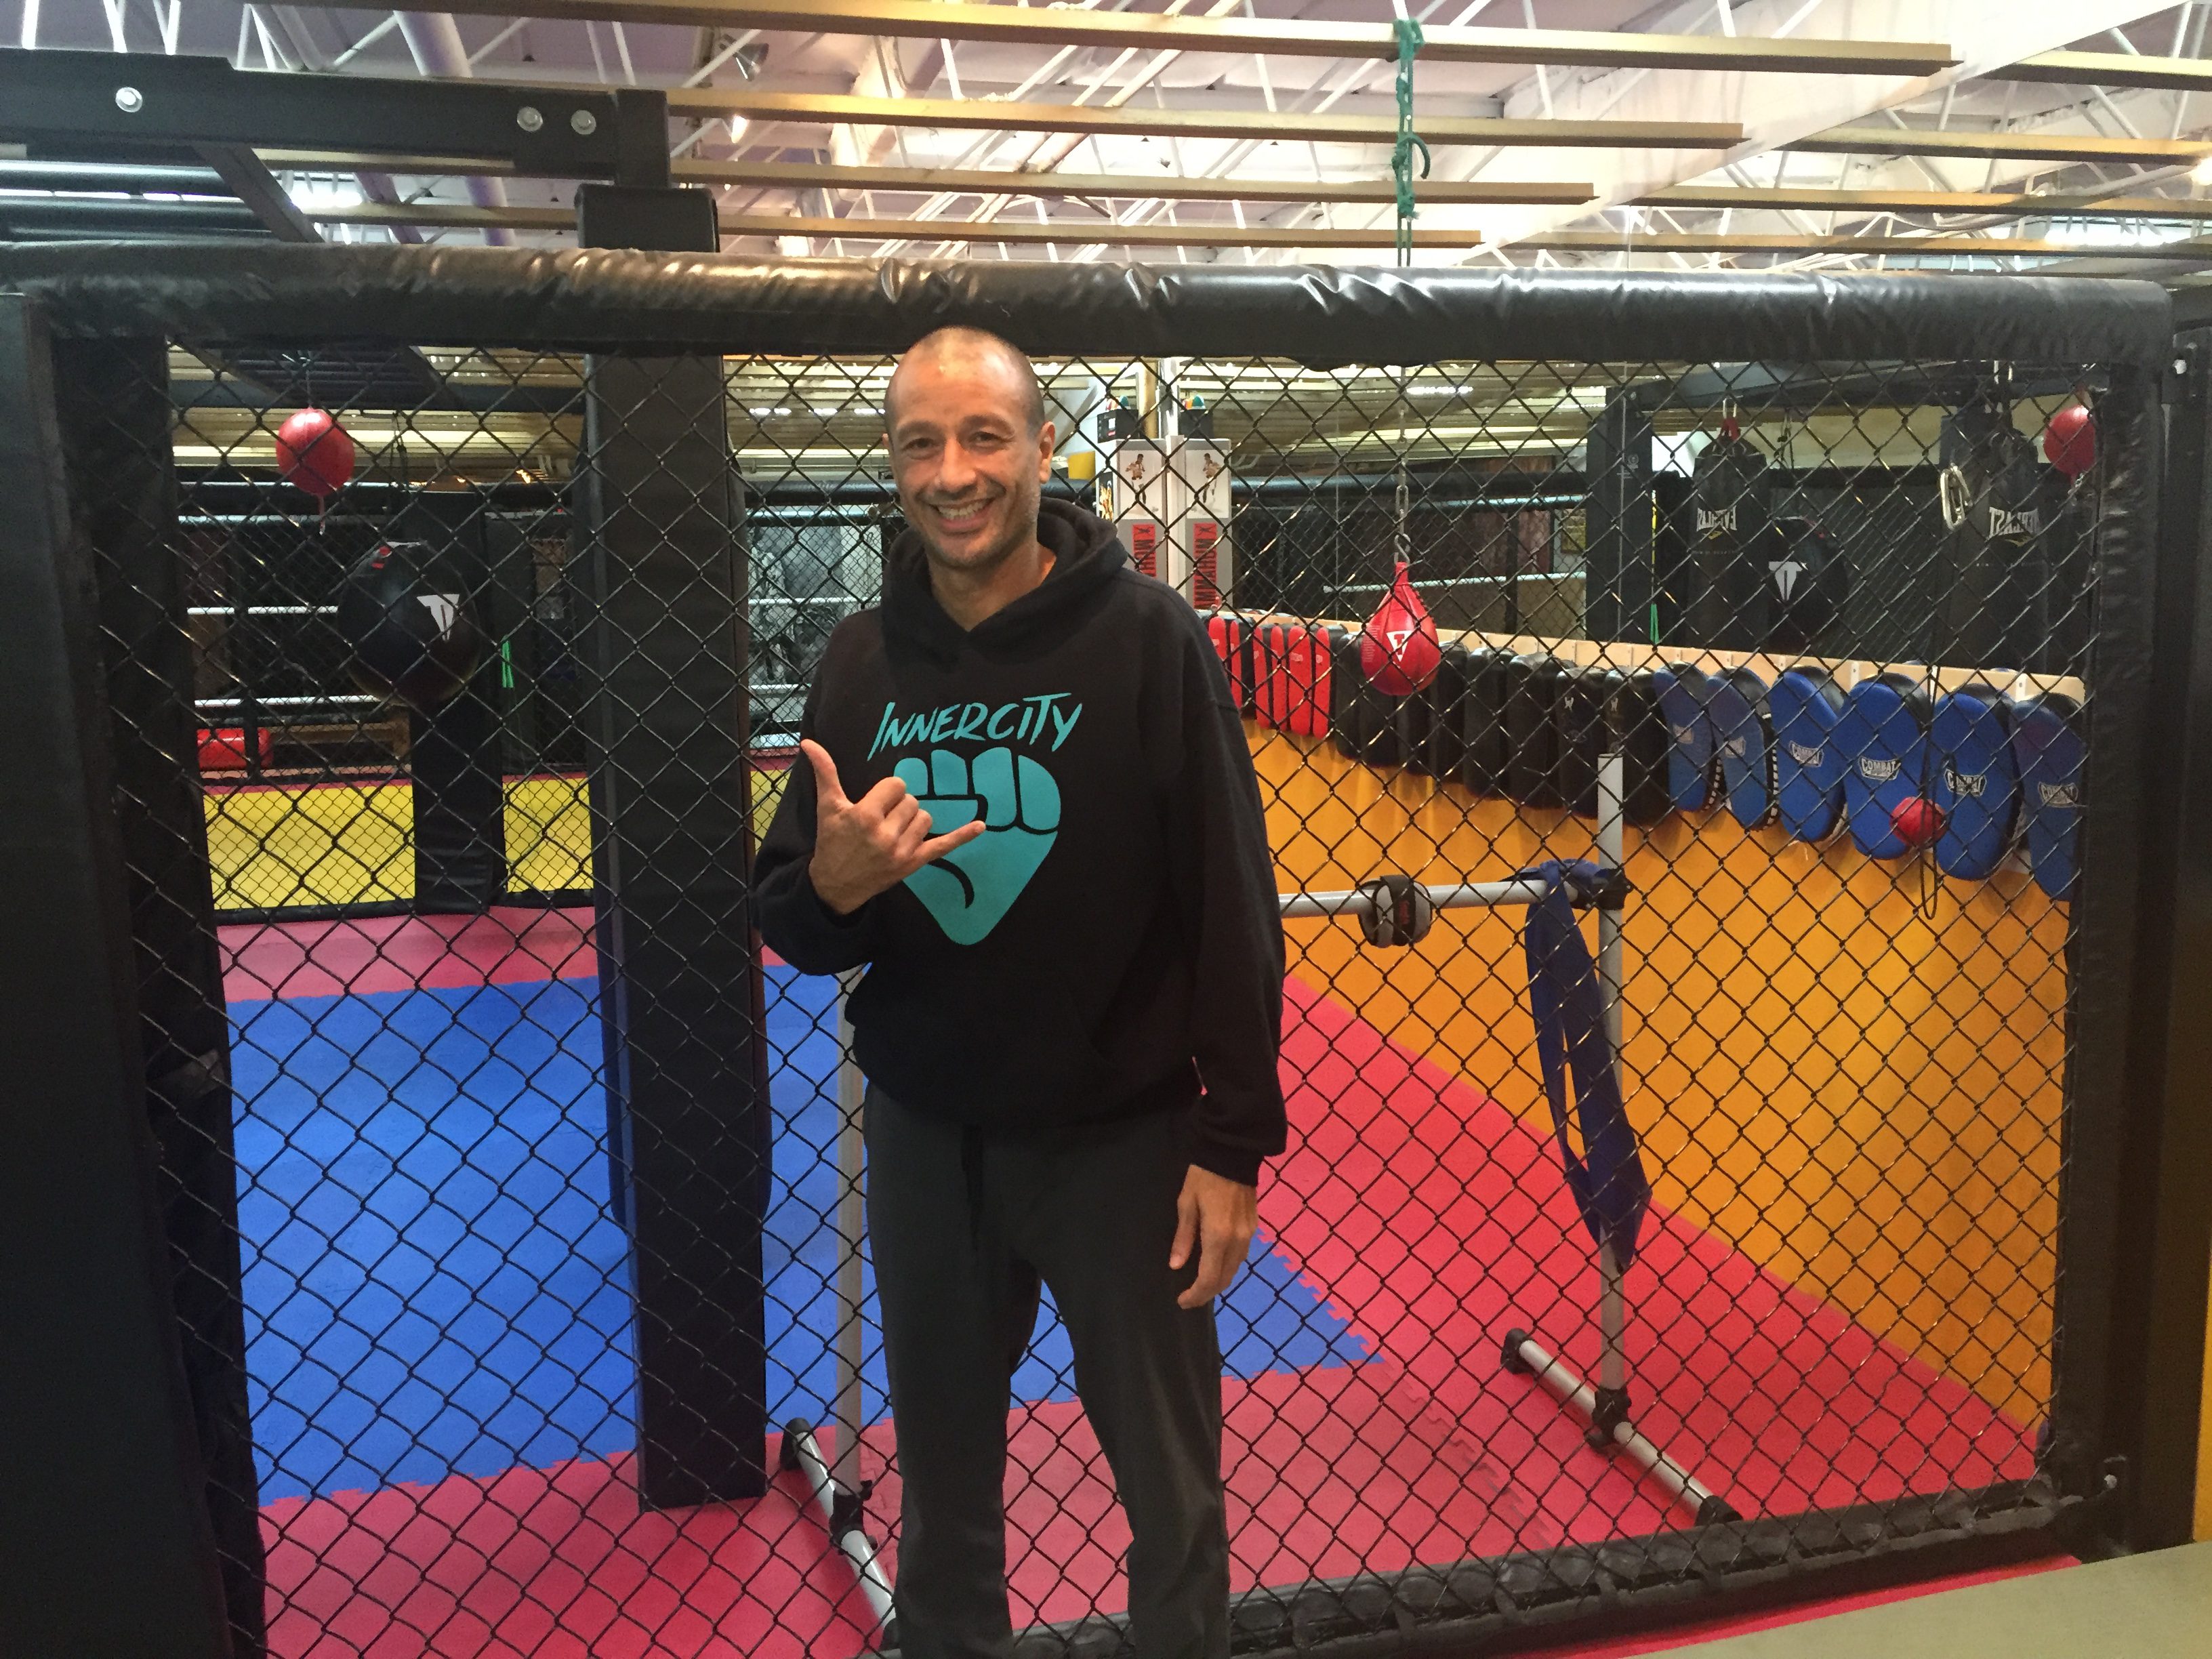 InnerCity MMA instructor Shah Franco standing in gym doing "hang loose" sign.